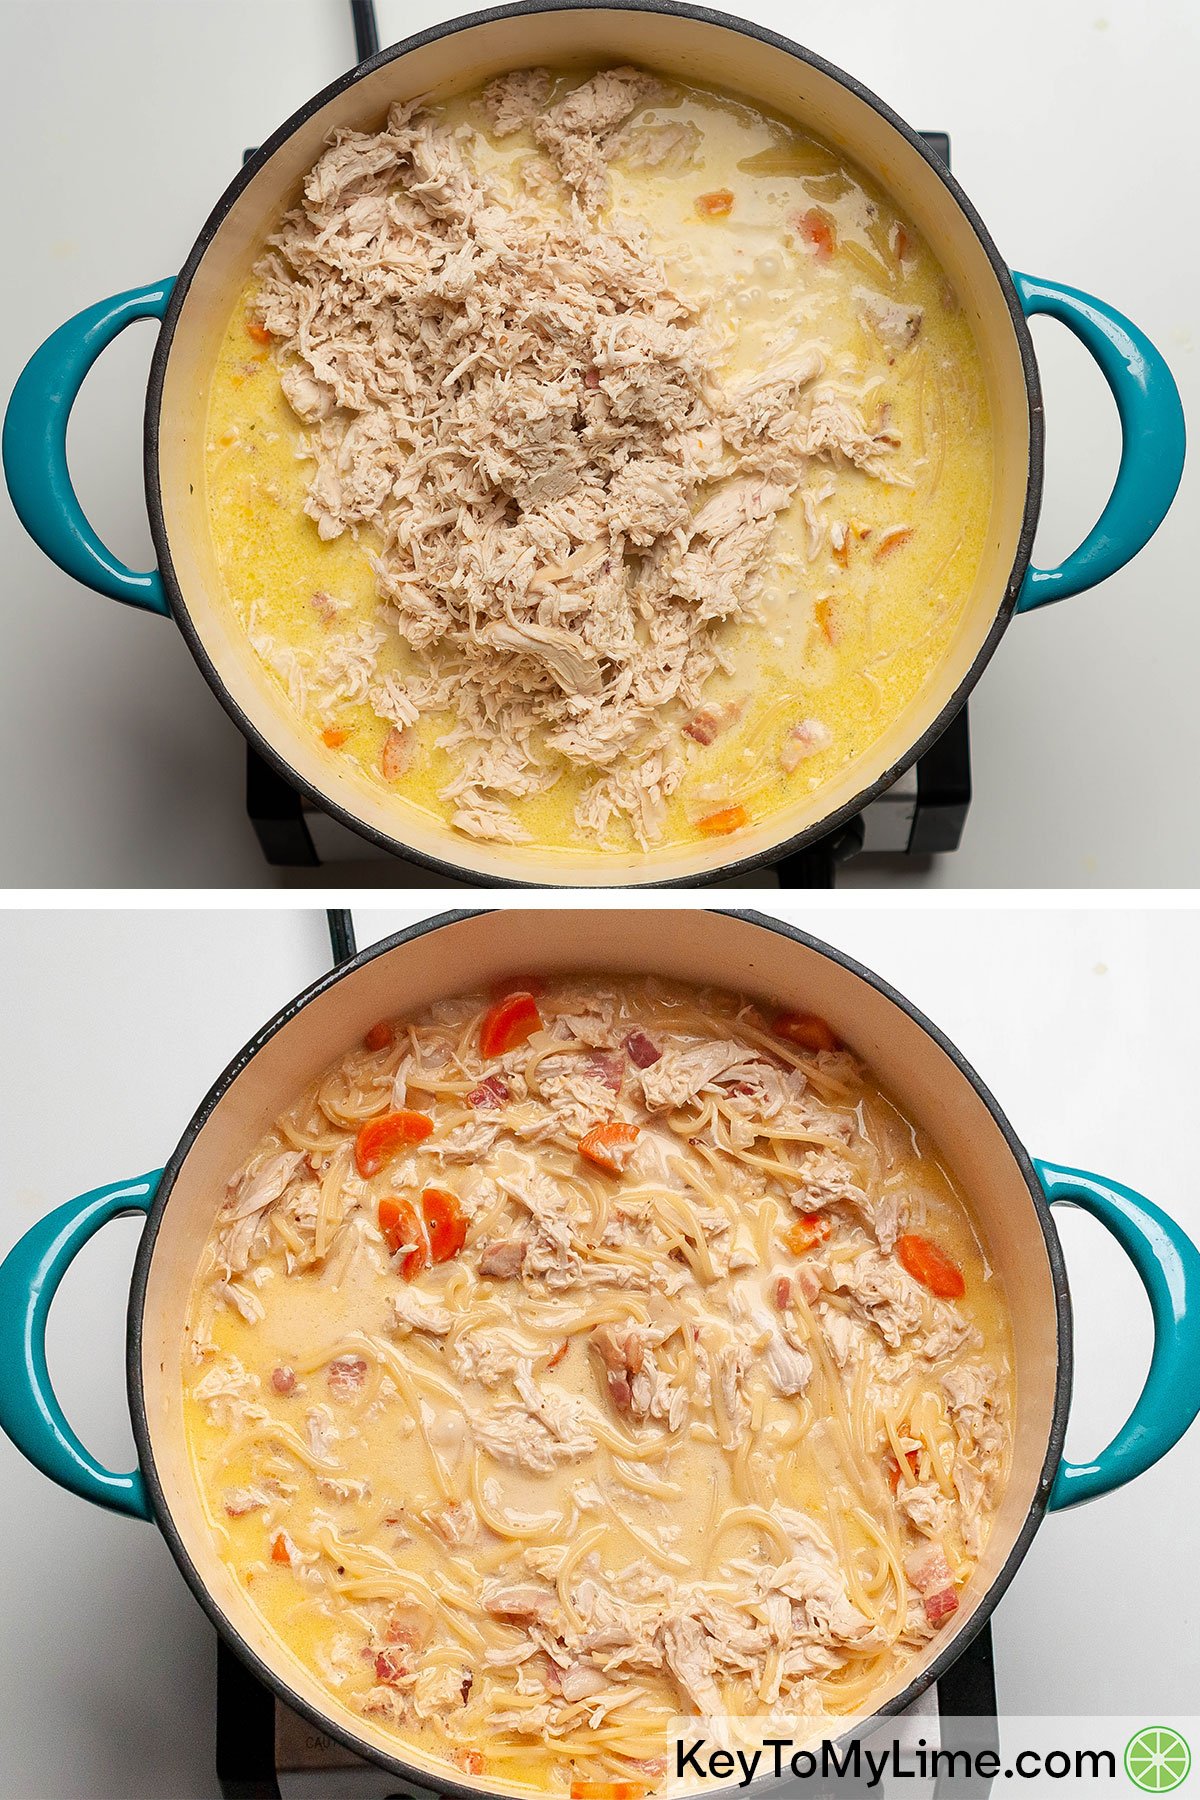 Mixing shredded chicken into creamy chicken soup.